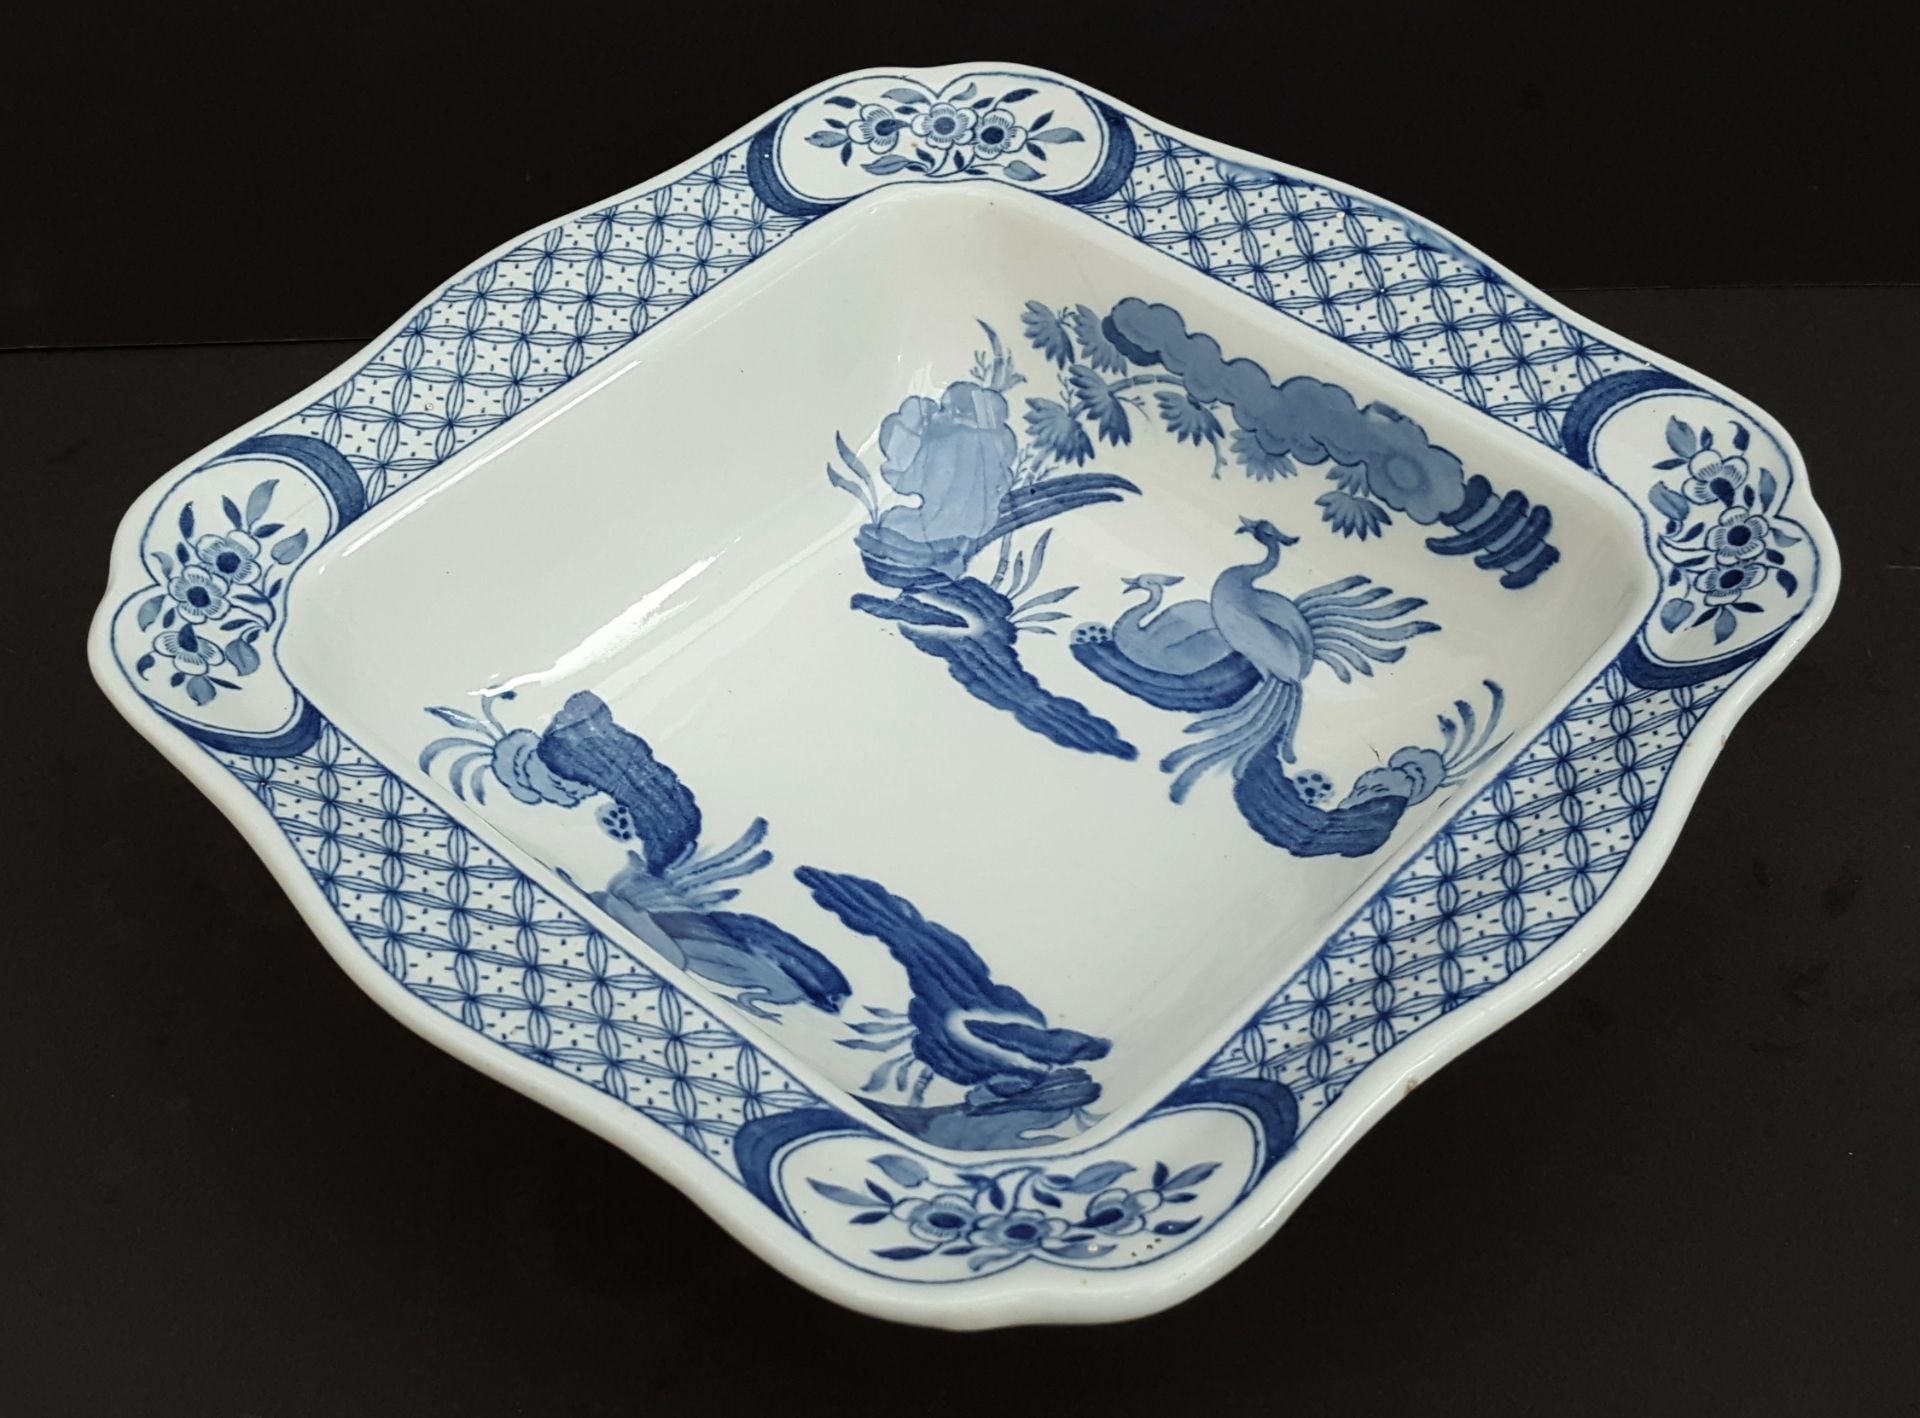 Collection of Blue & White Furnivals Ltd Old Chelsea China Total Of 7 Pieces Reg No c1913 - Image 4 of 5